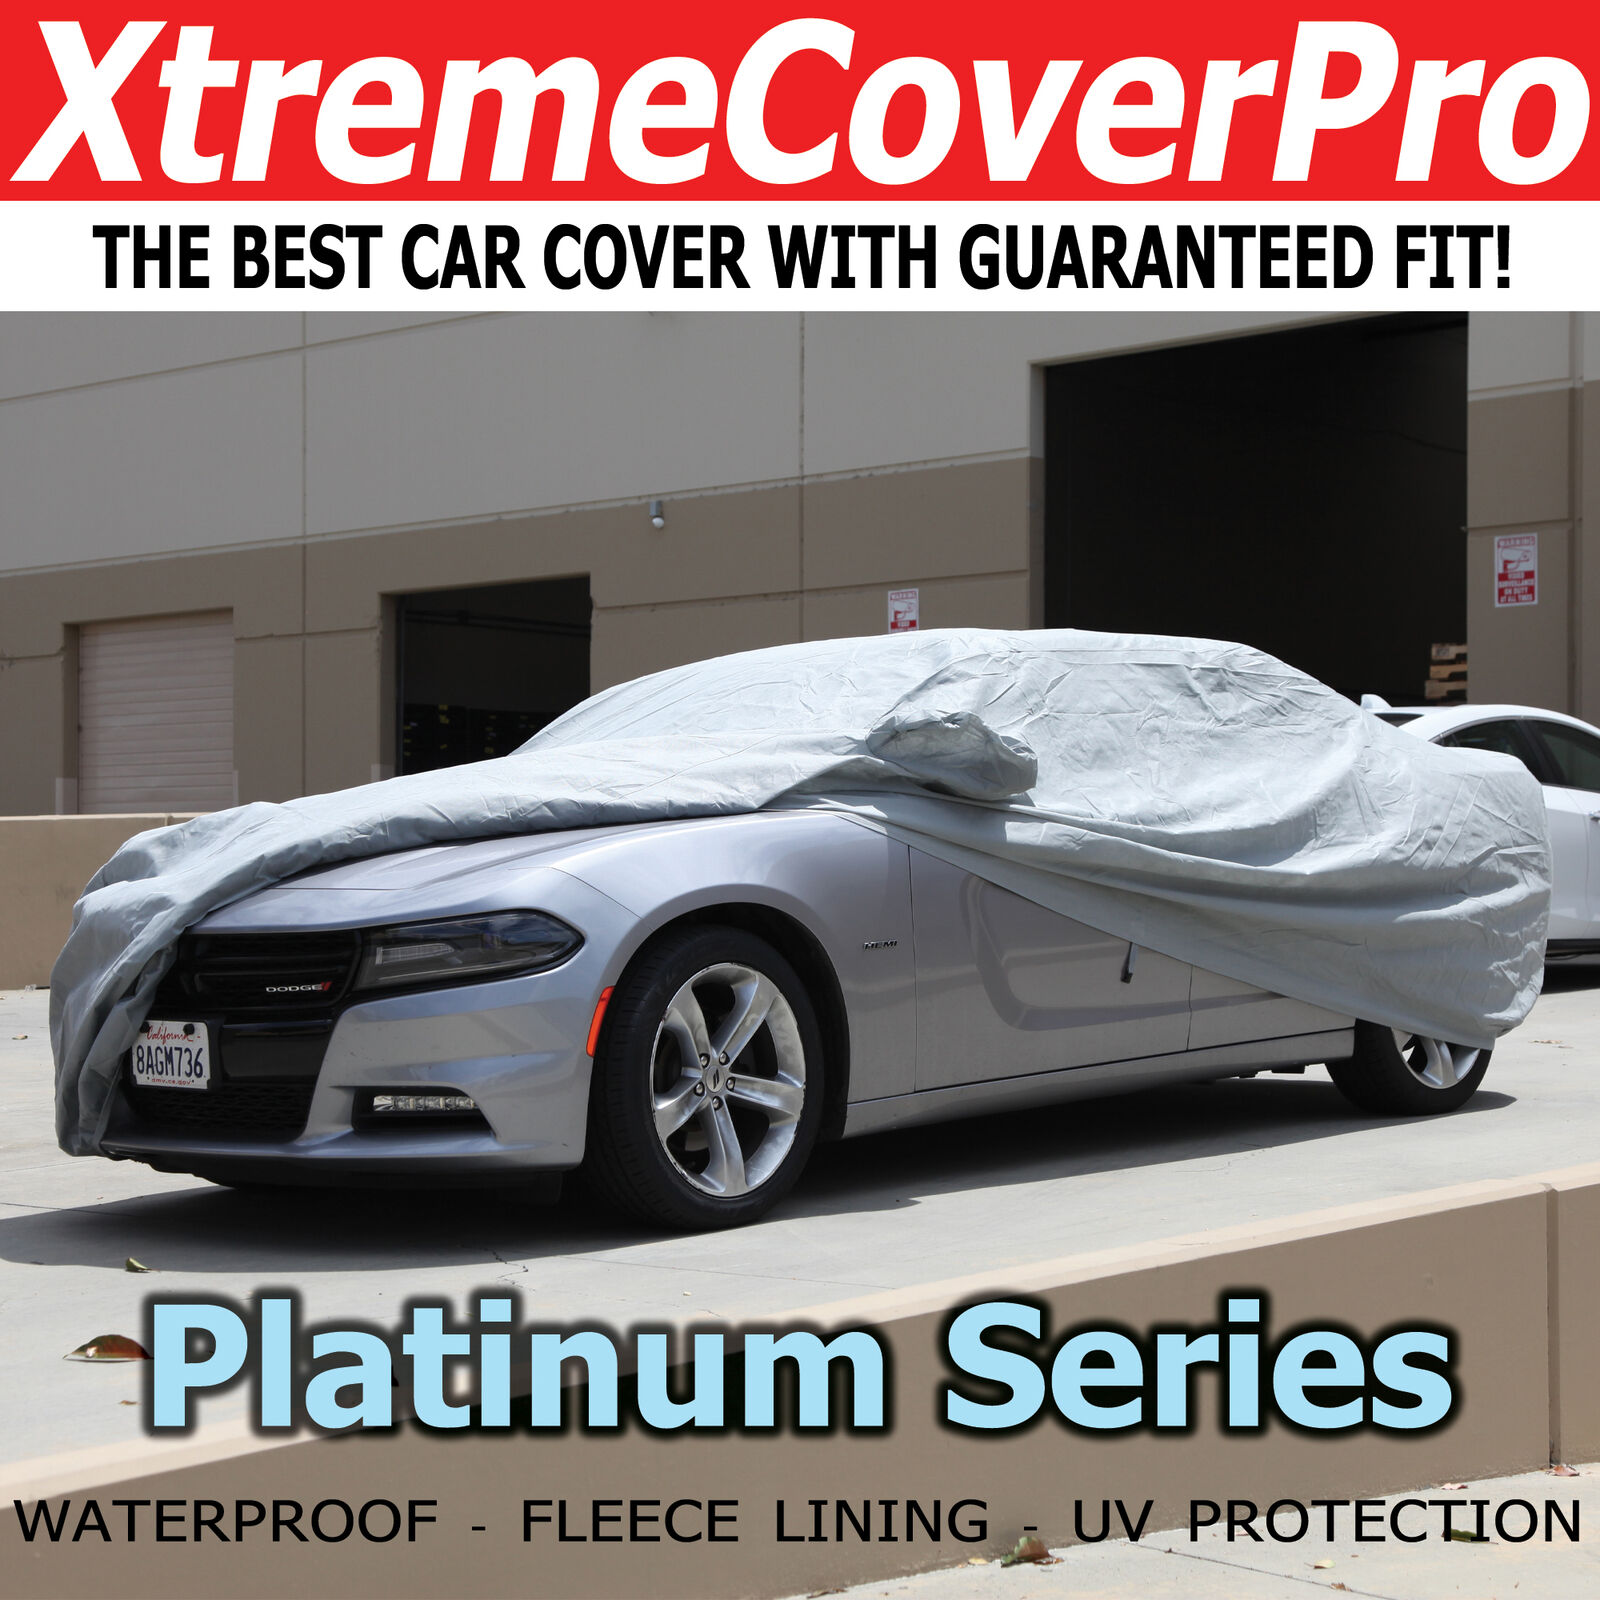 2014 Ford MUSTANG Shelby GT500 Convertible Waterproof Car Cover w/ Mirror Pocket